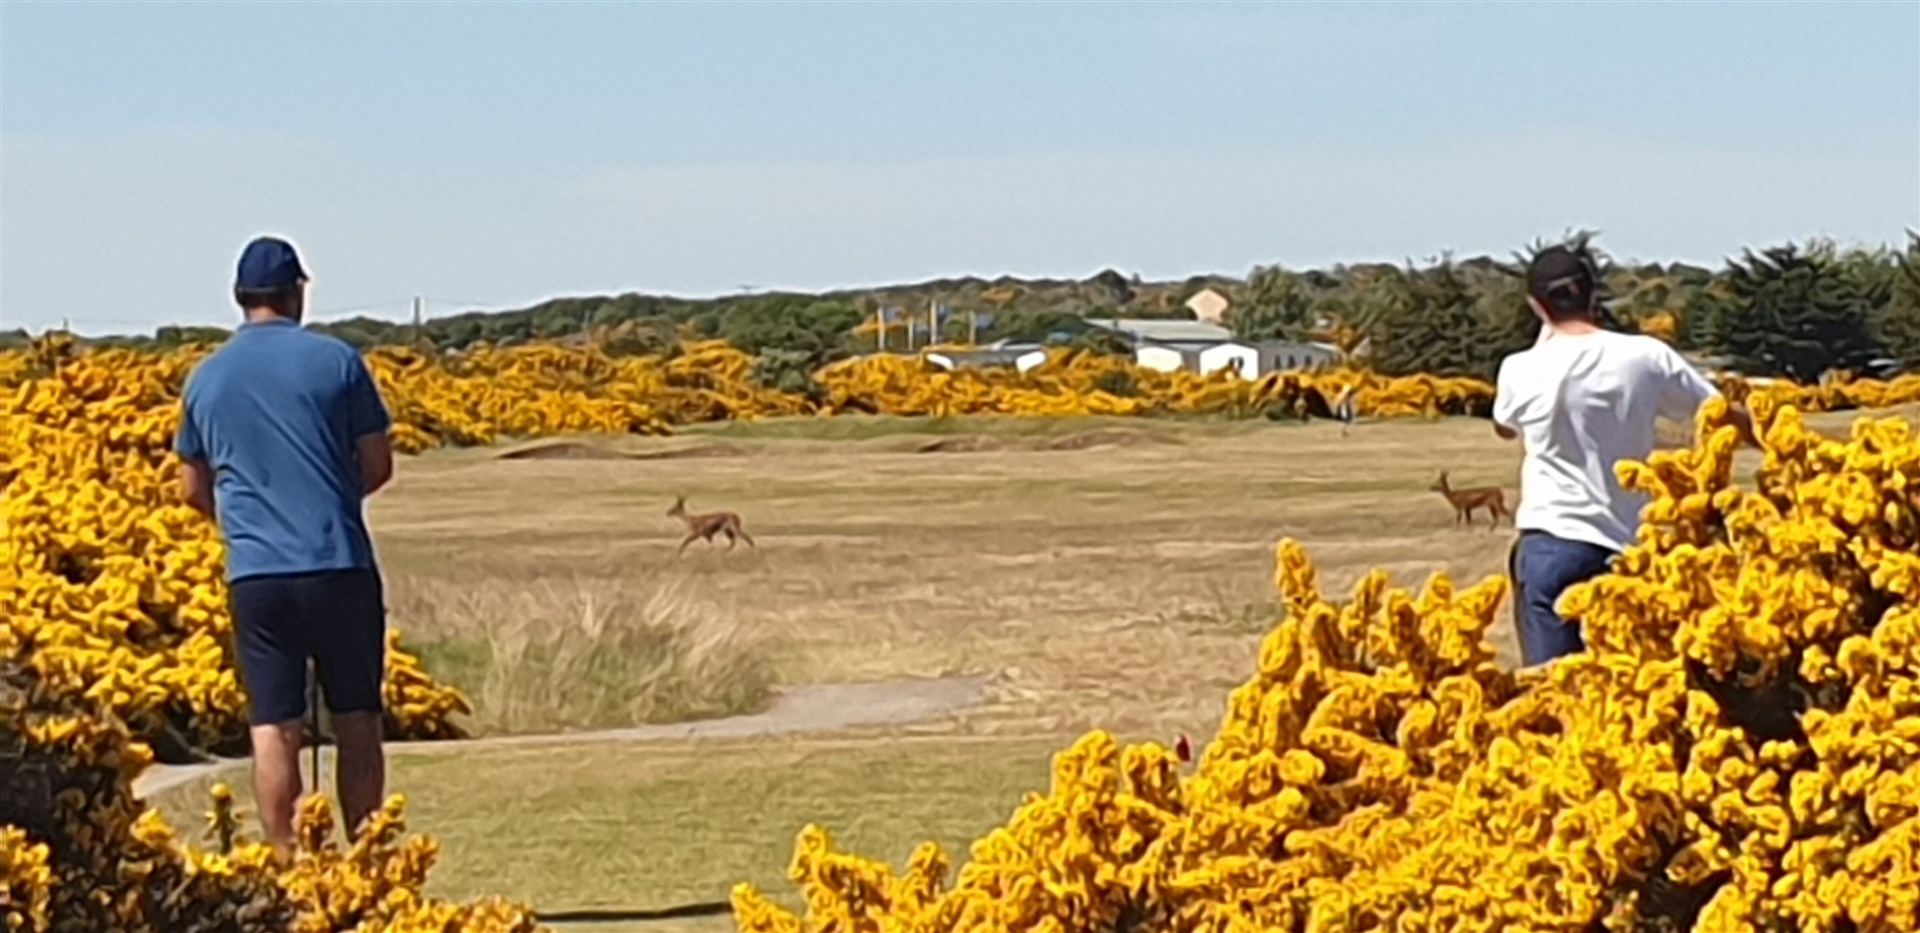 The deer make their way across the fairway at Moray Golf Club.